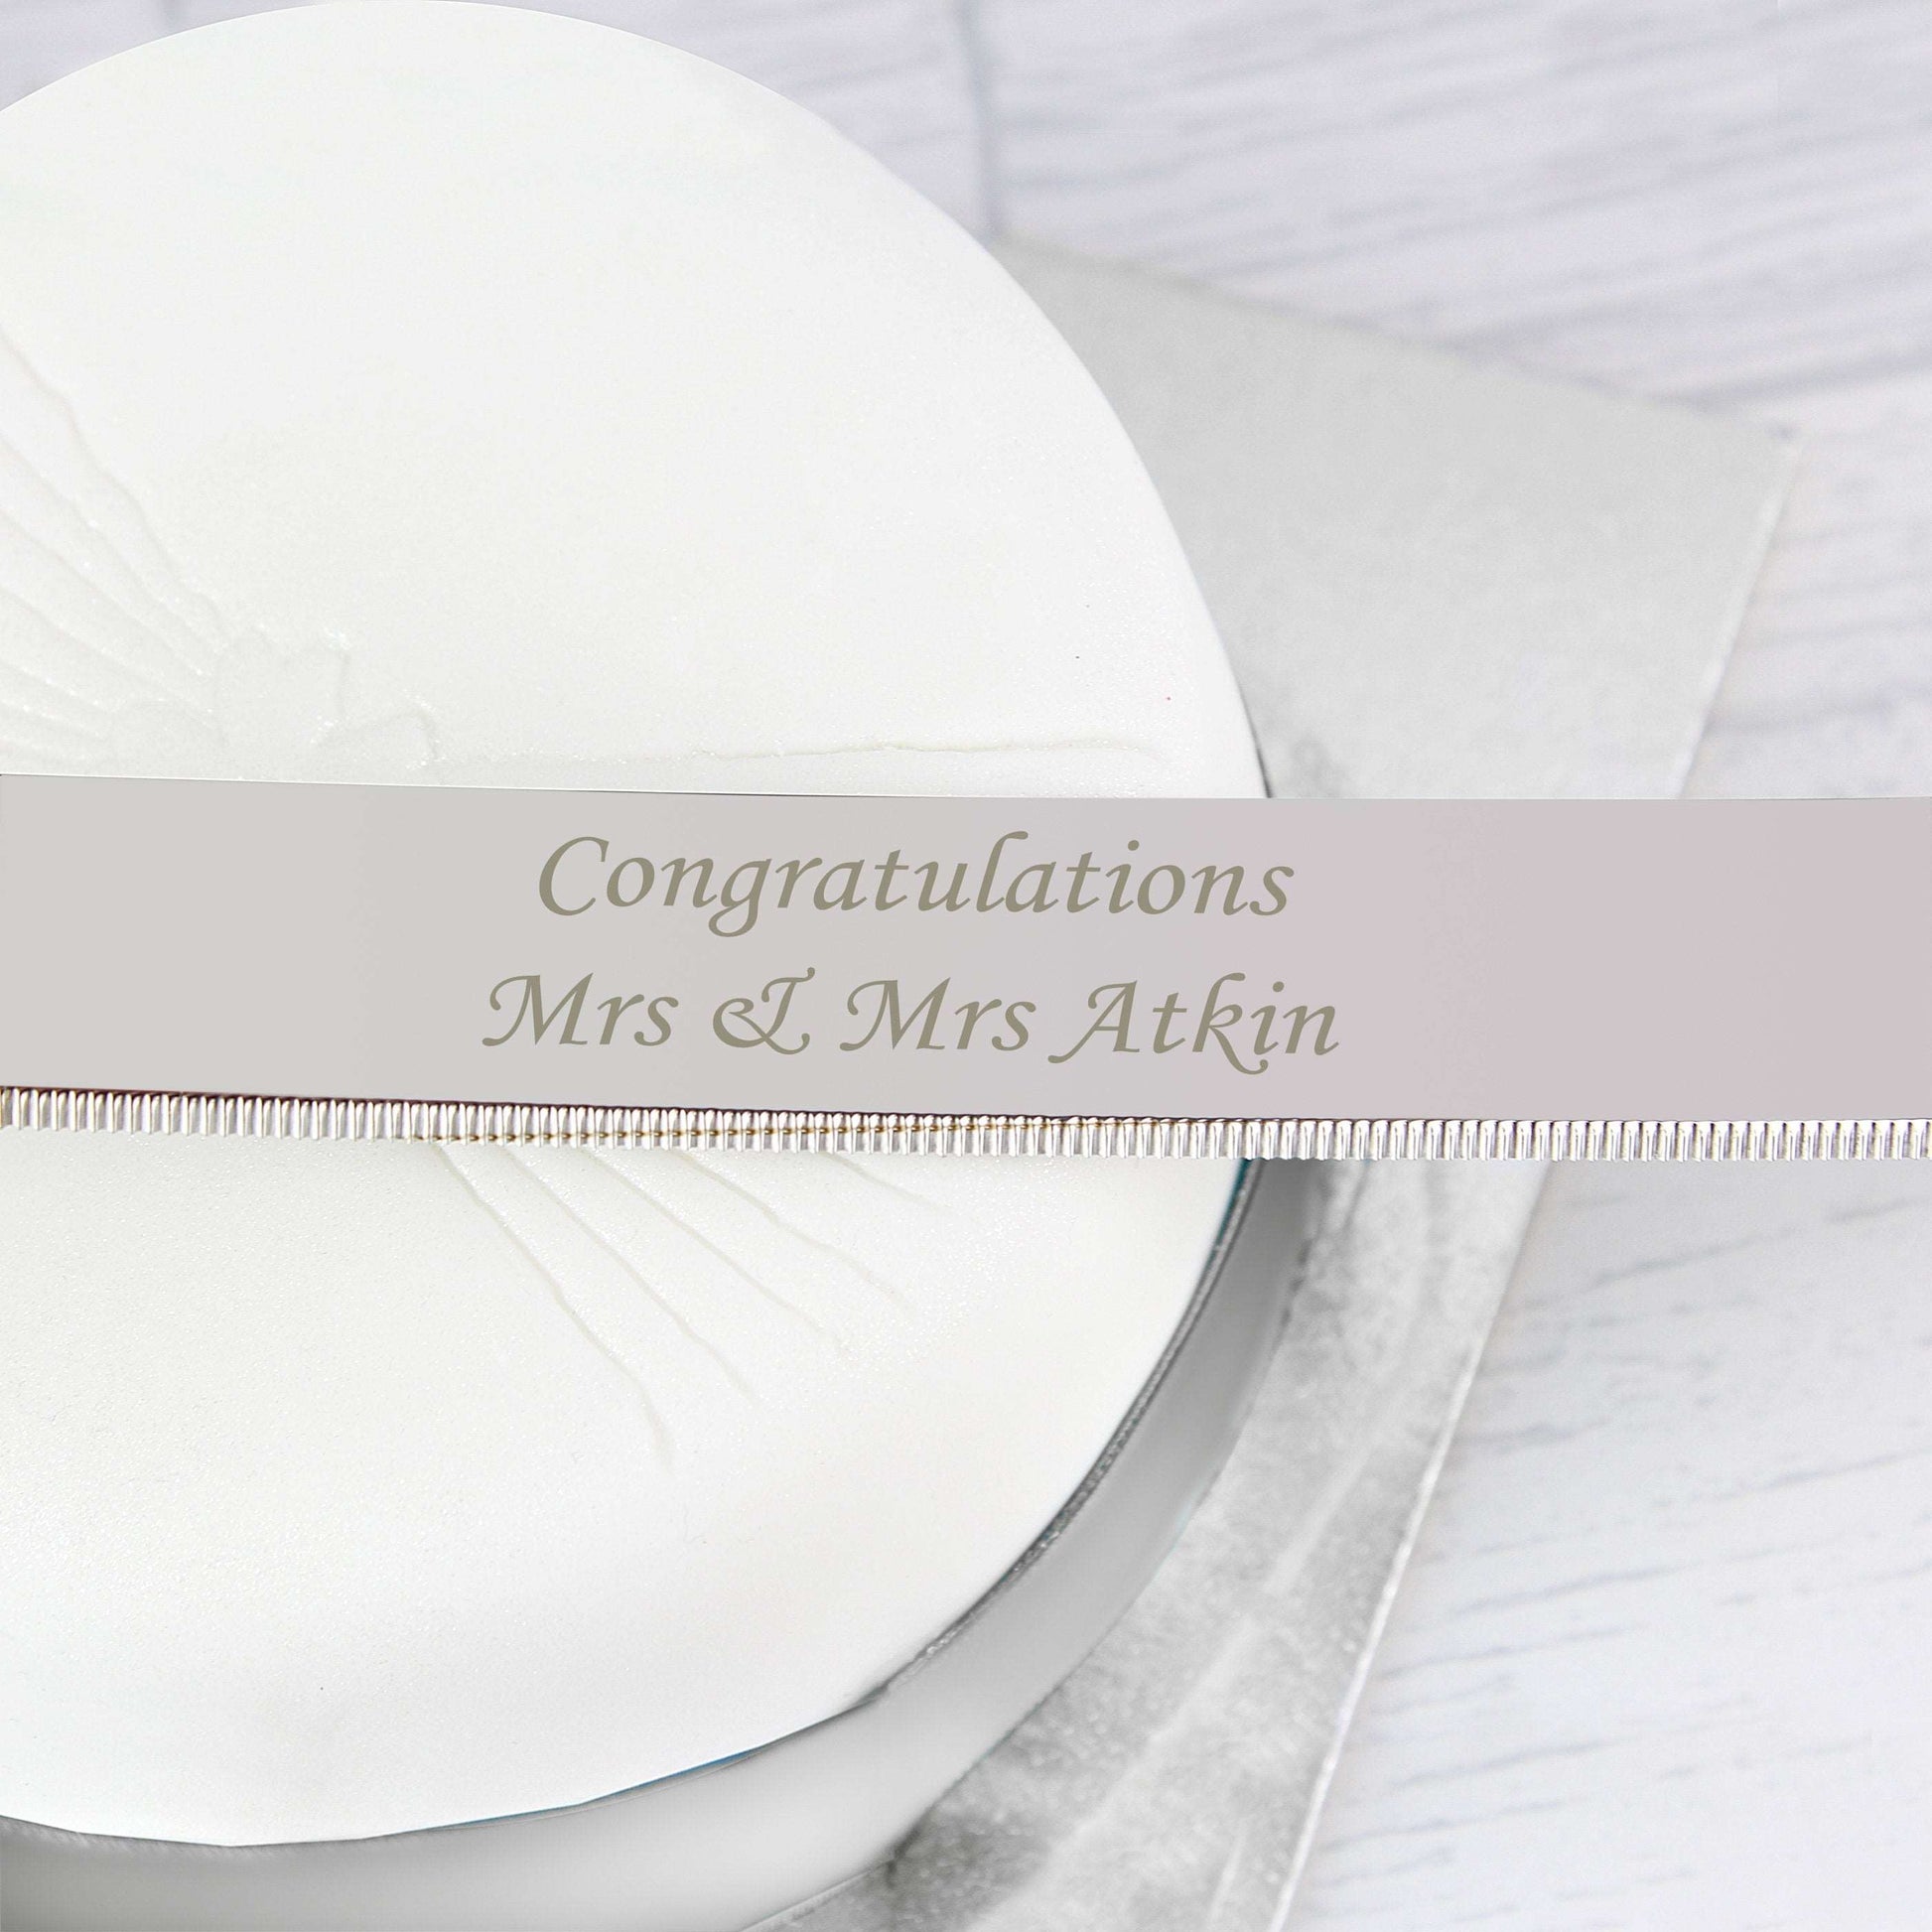 Congratulations Mr & Mrs Cake Knife By Sweetlea Gifts